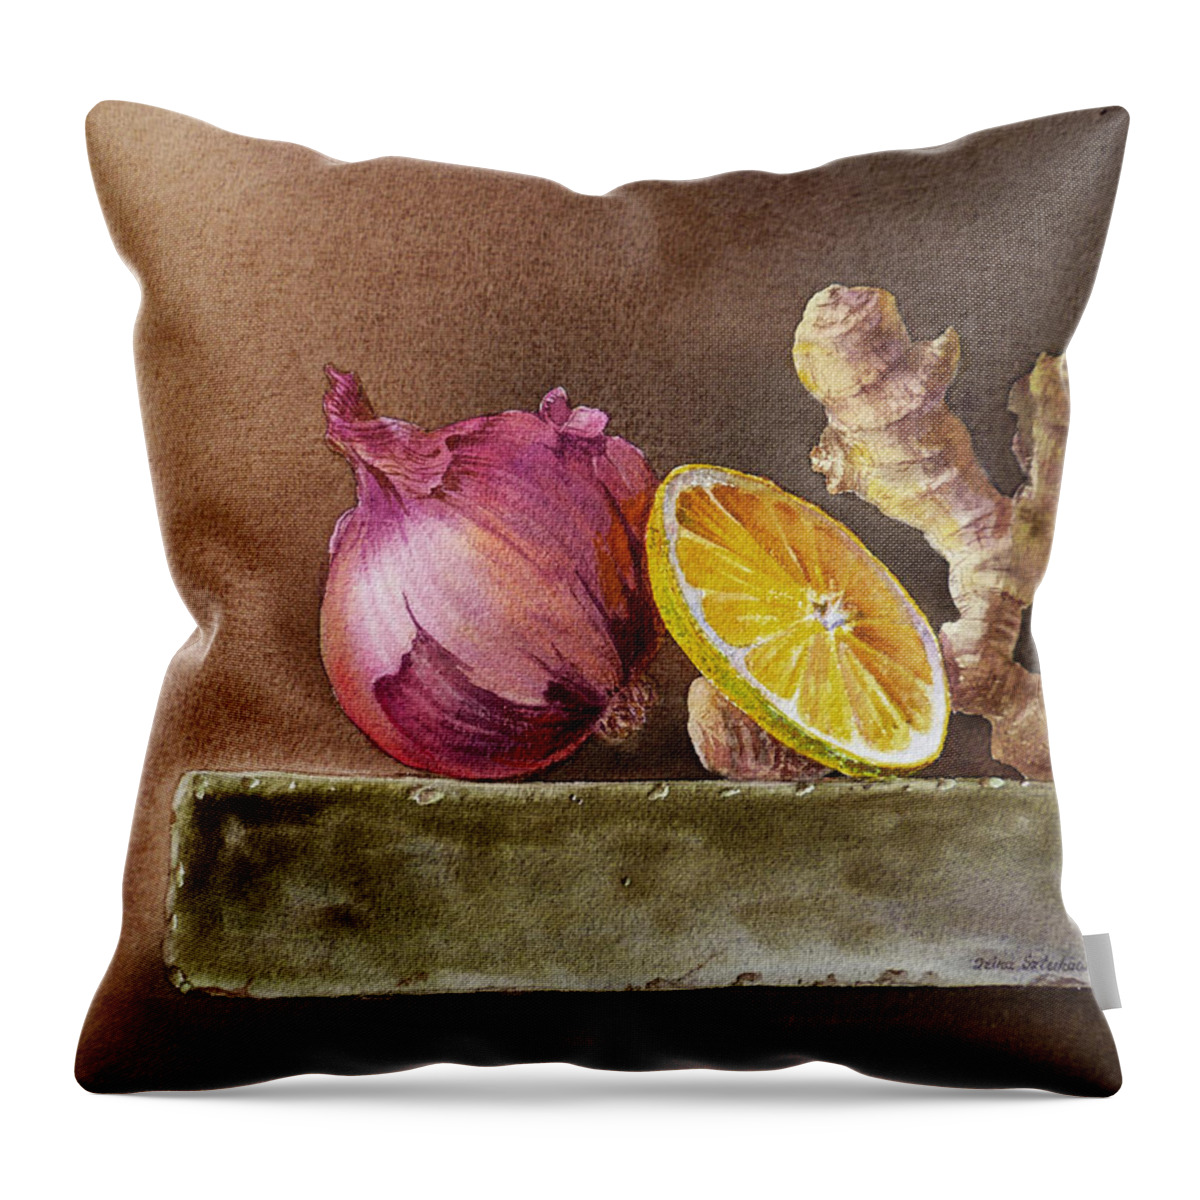 Onion Throw Pillow featuring the painting Still Life With Onion Lemon And Ginger by Irina Sztukowski